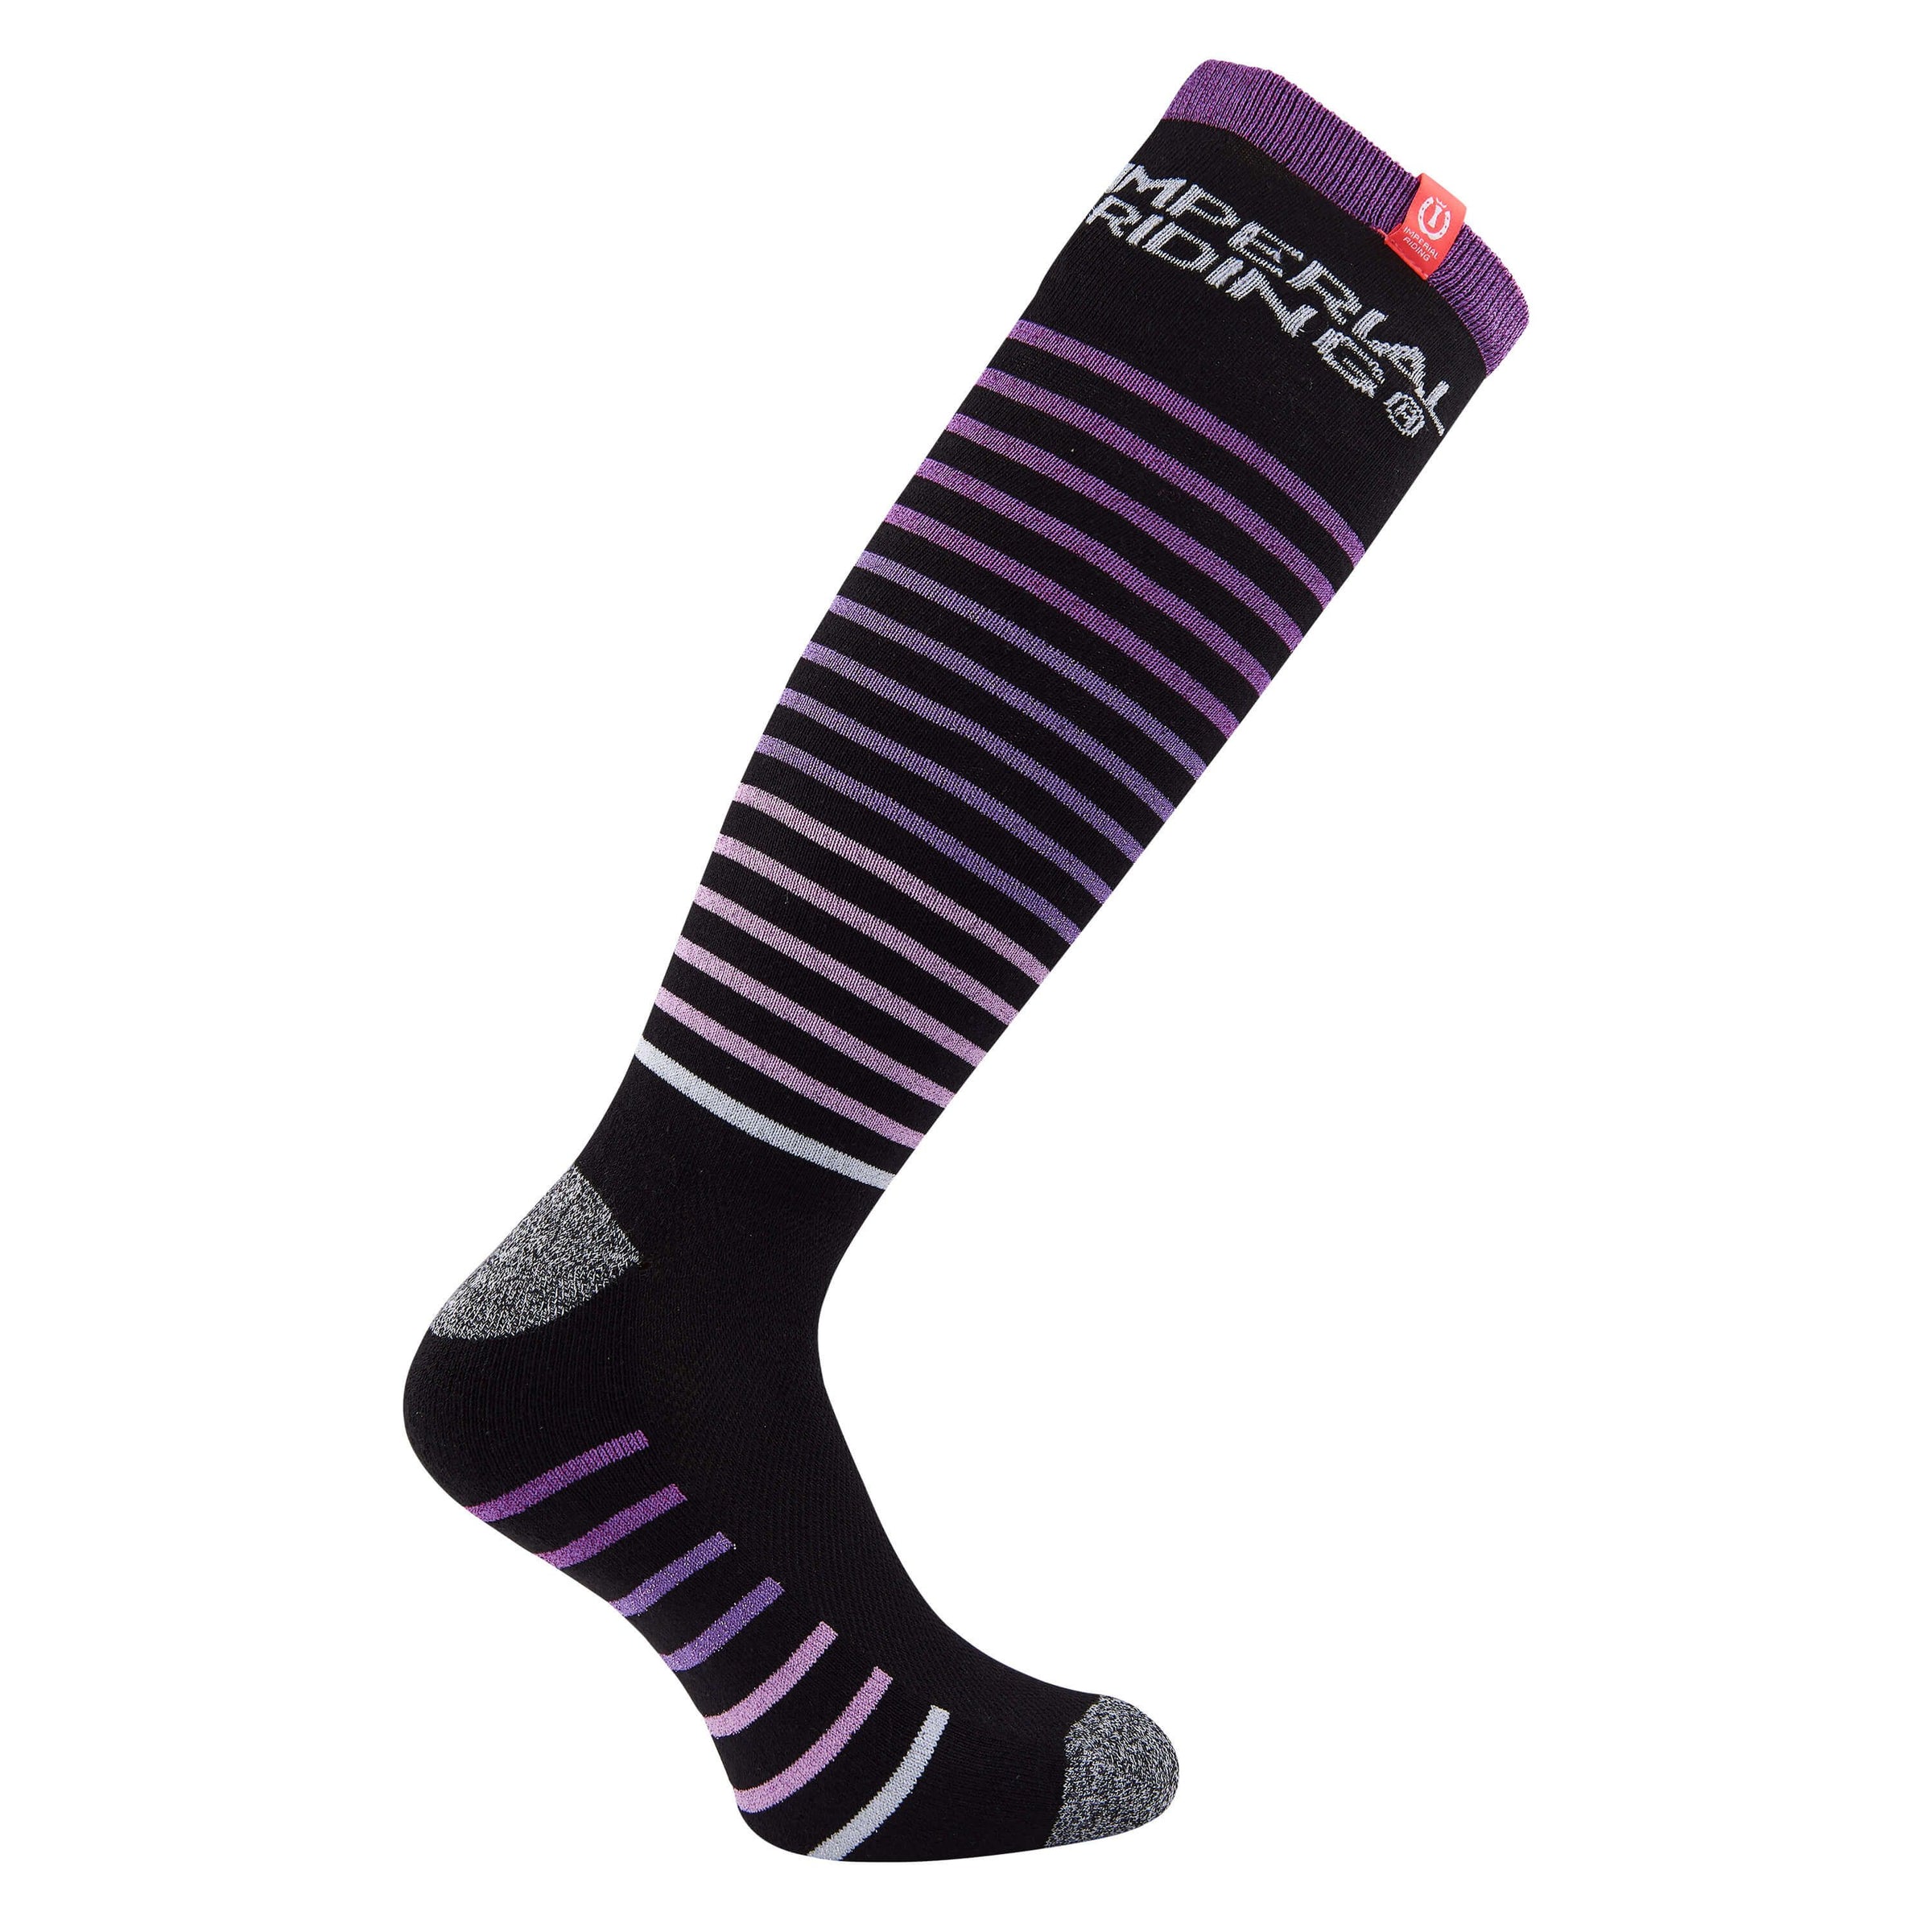 Imperial riding up in space black purple glitter riding socks